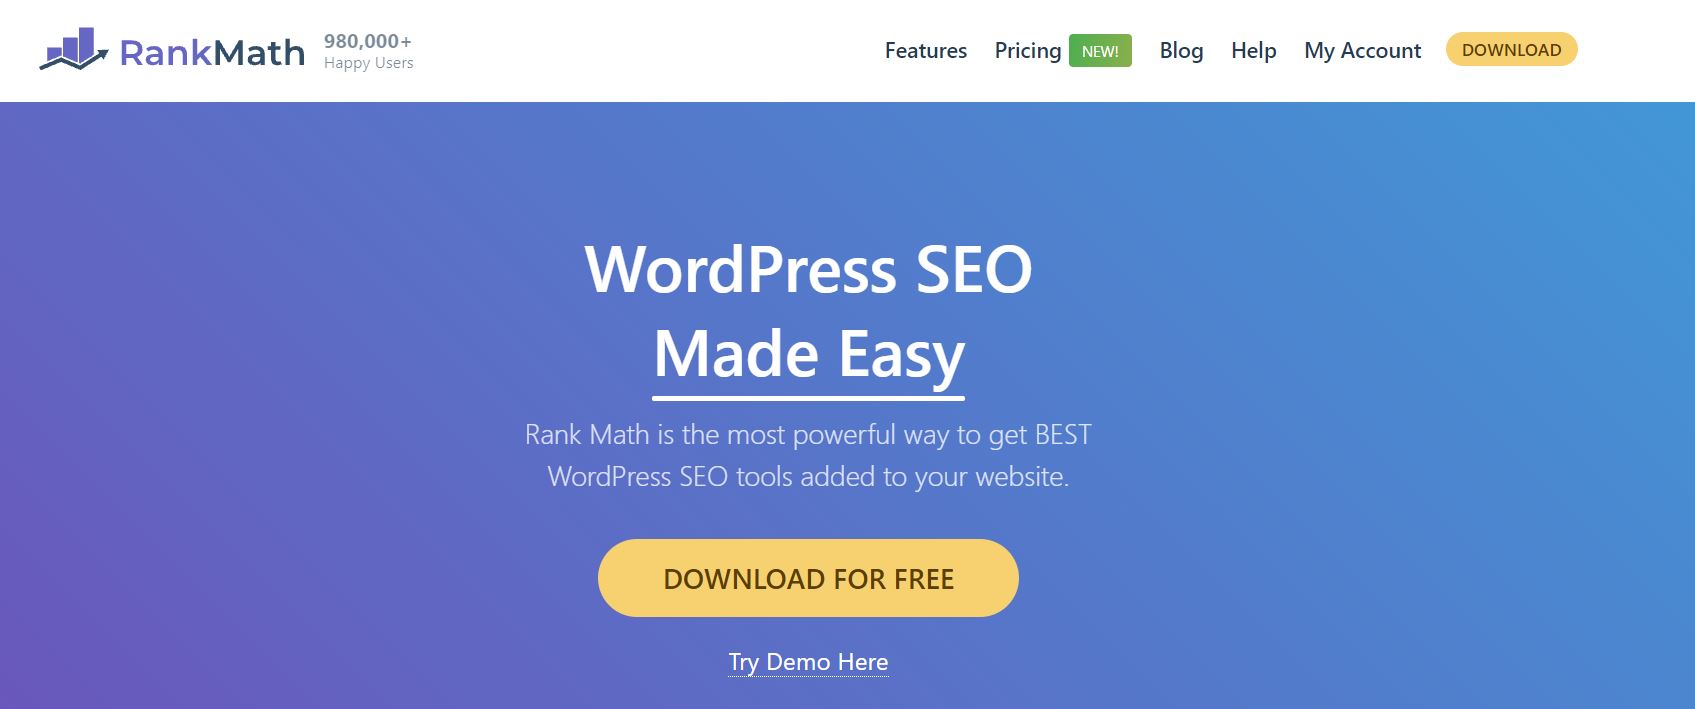 What is your review on Rank Math SEO Tool?